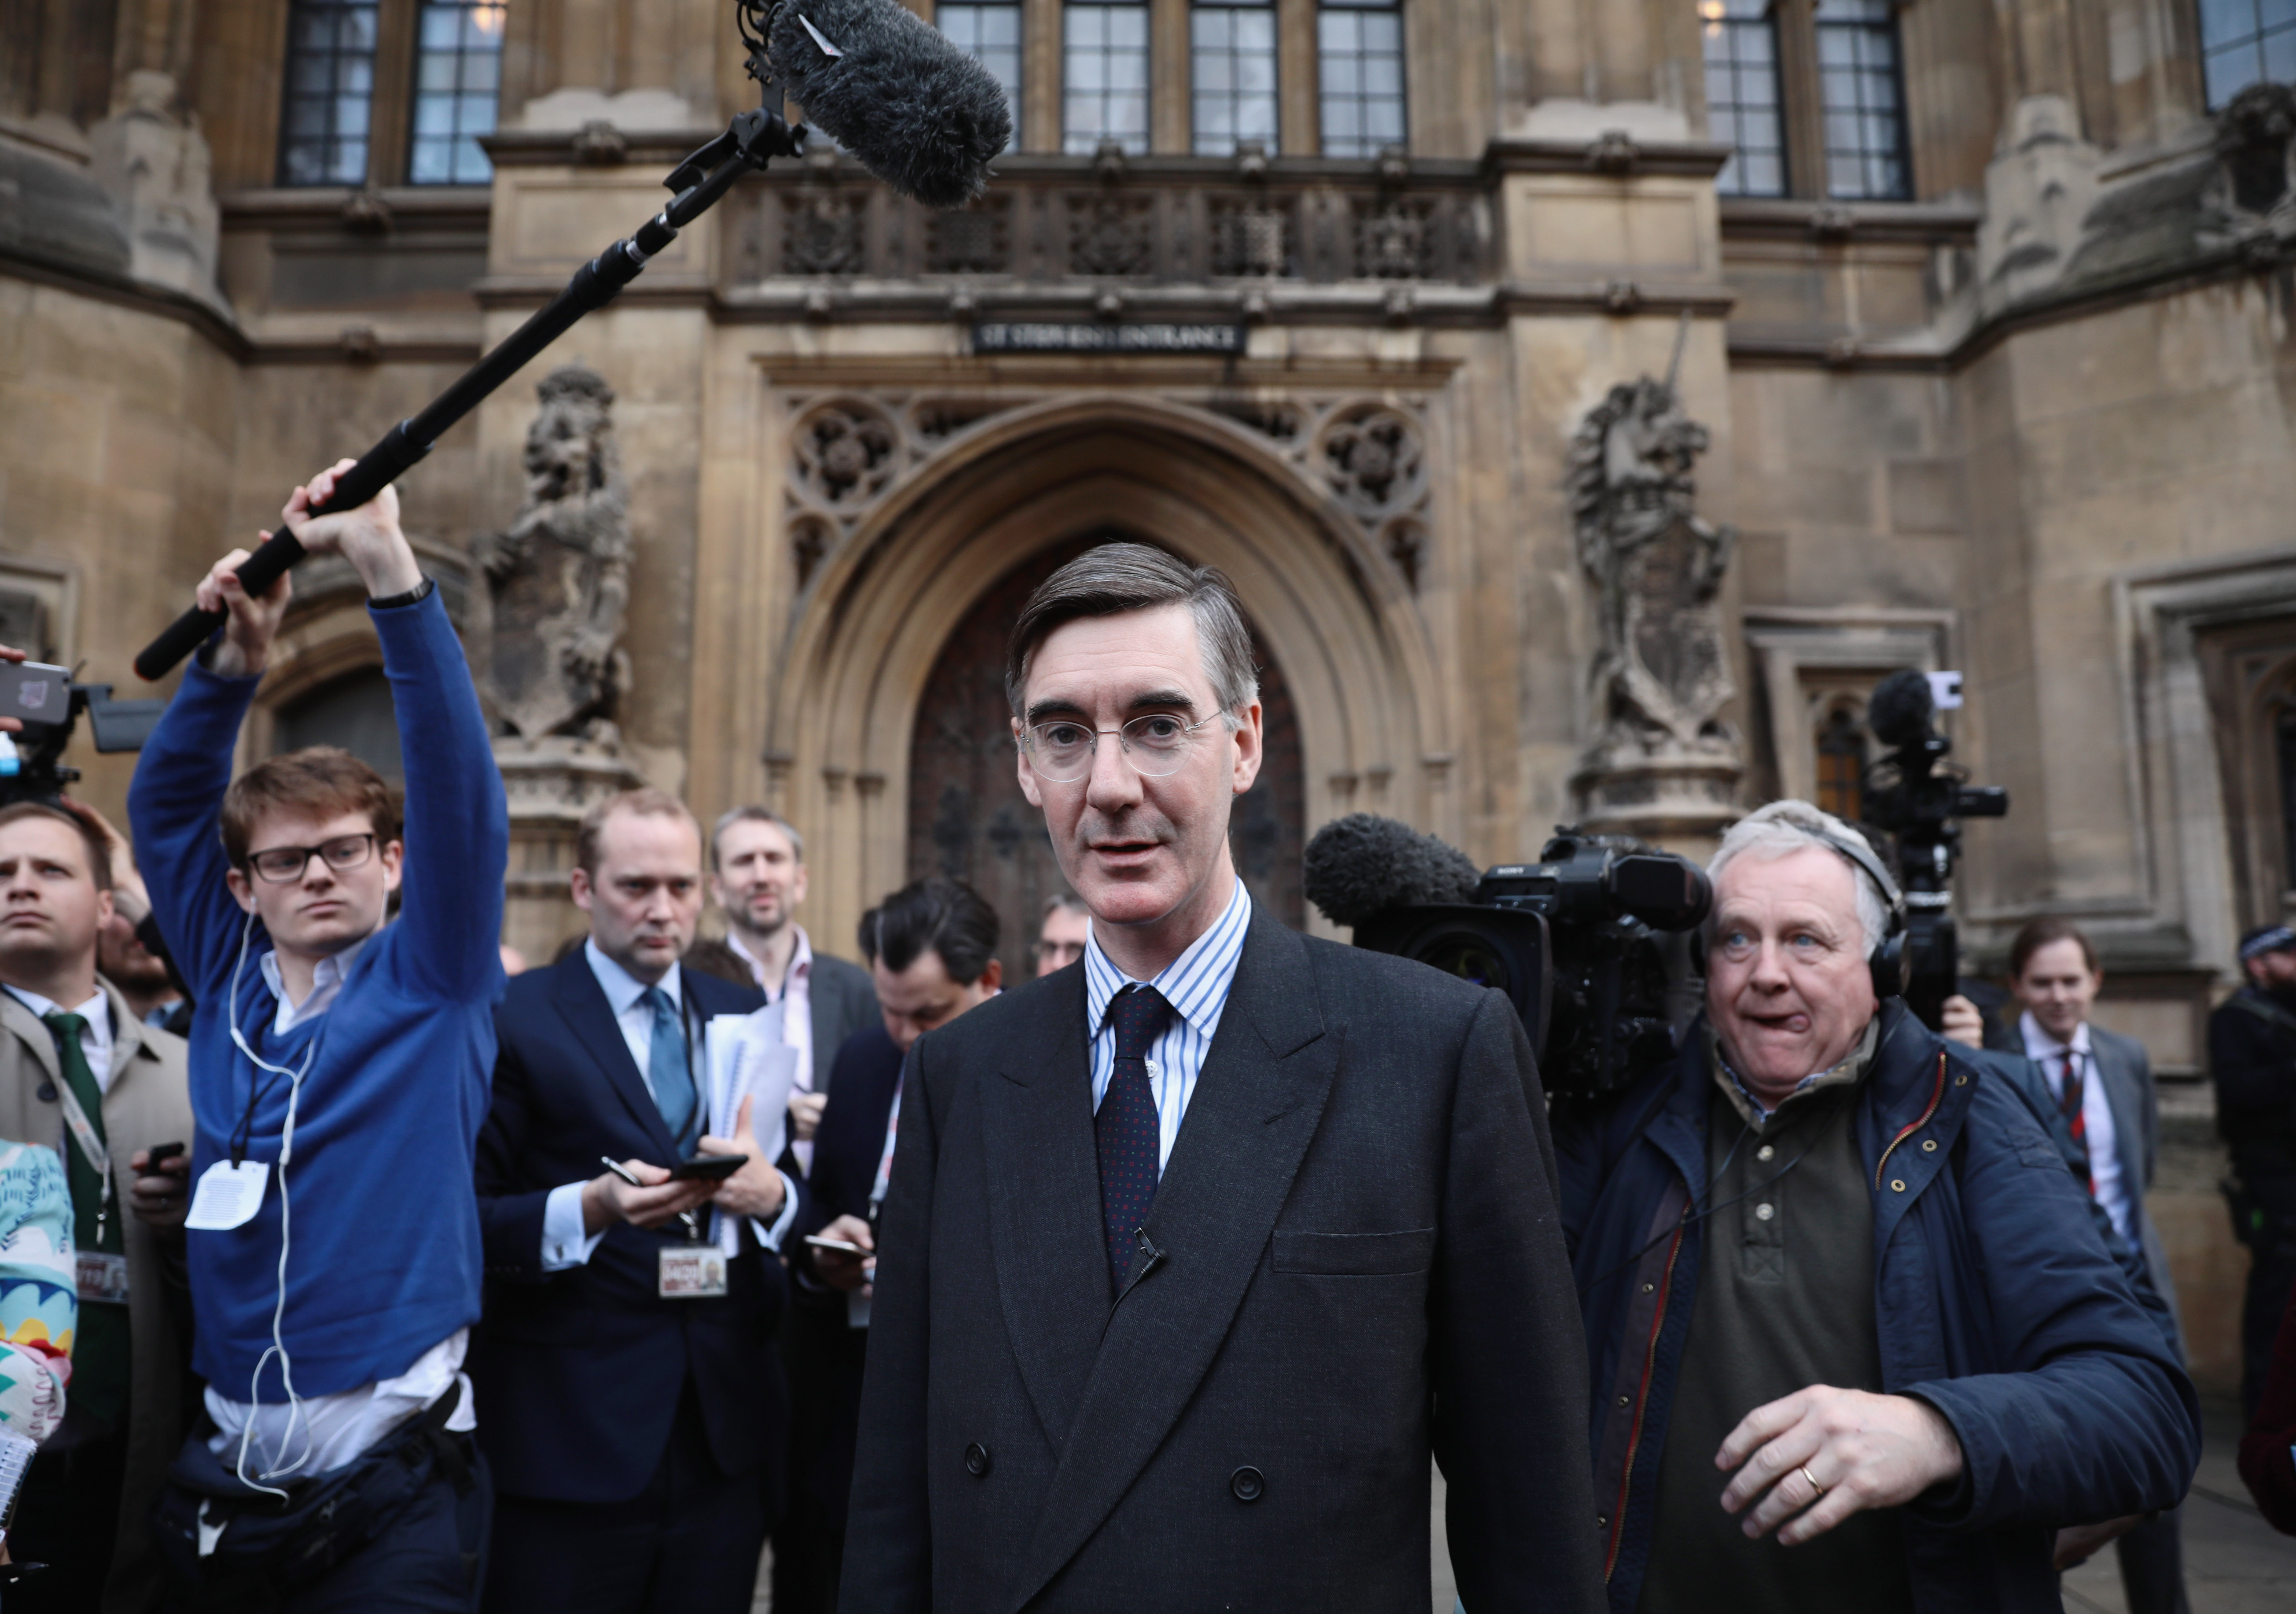 Jacob Rees-Mogg speaks to the media (Dan Kitwood/Getty Images)